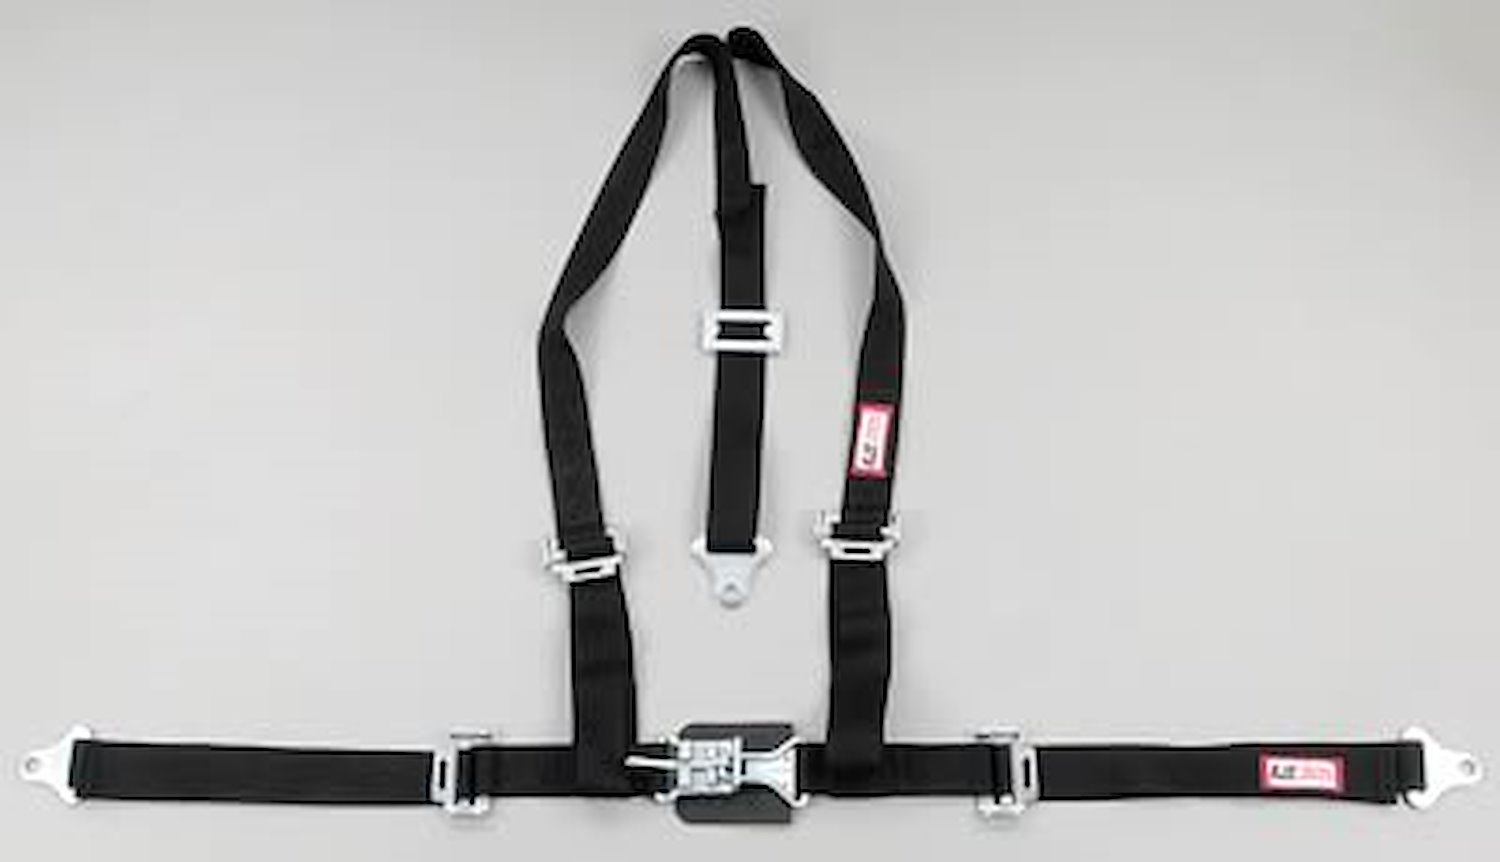 NON-SFI L&L HARNESS 2 PULL UP Lap Belt SNAP SEWN IN 2 S.H. Y FLOOR Mount WRAP/SNAP YELLOW